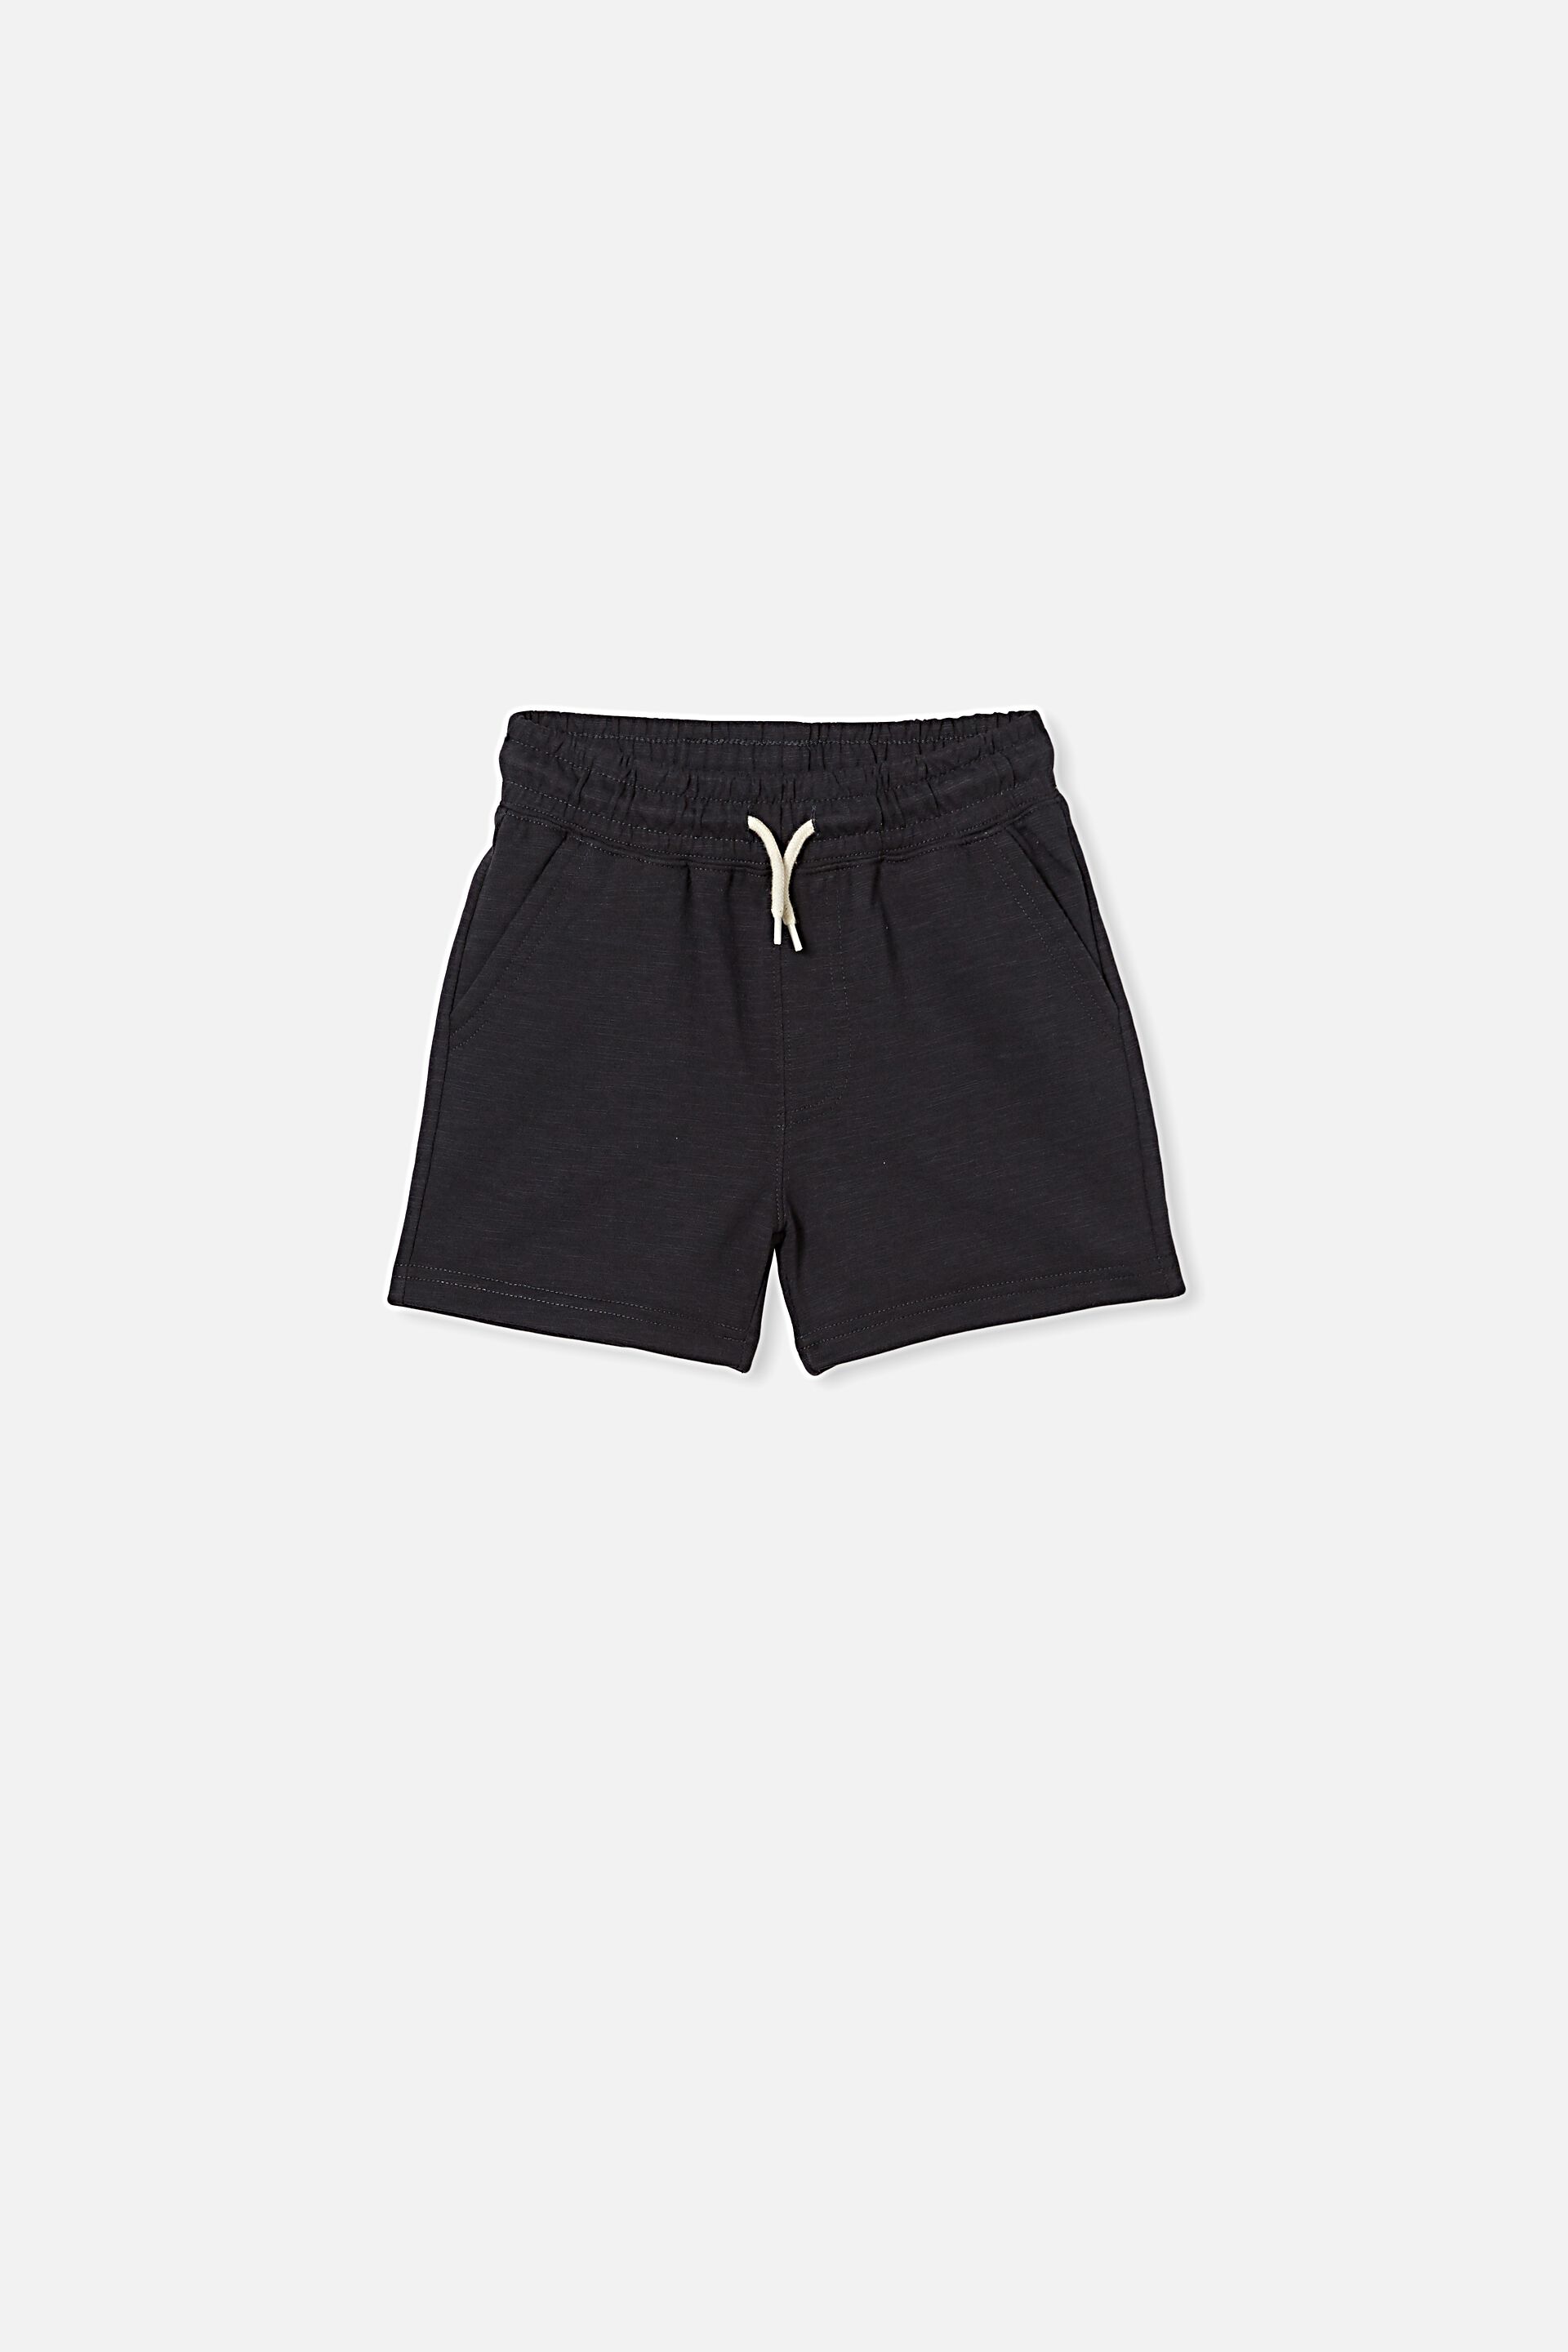 slouch shorts